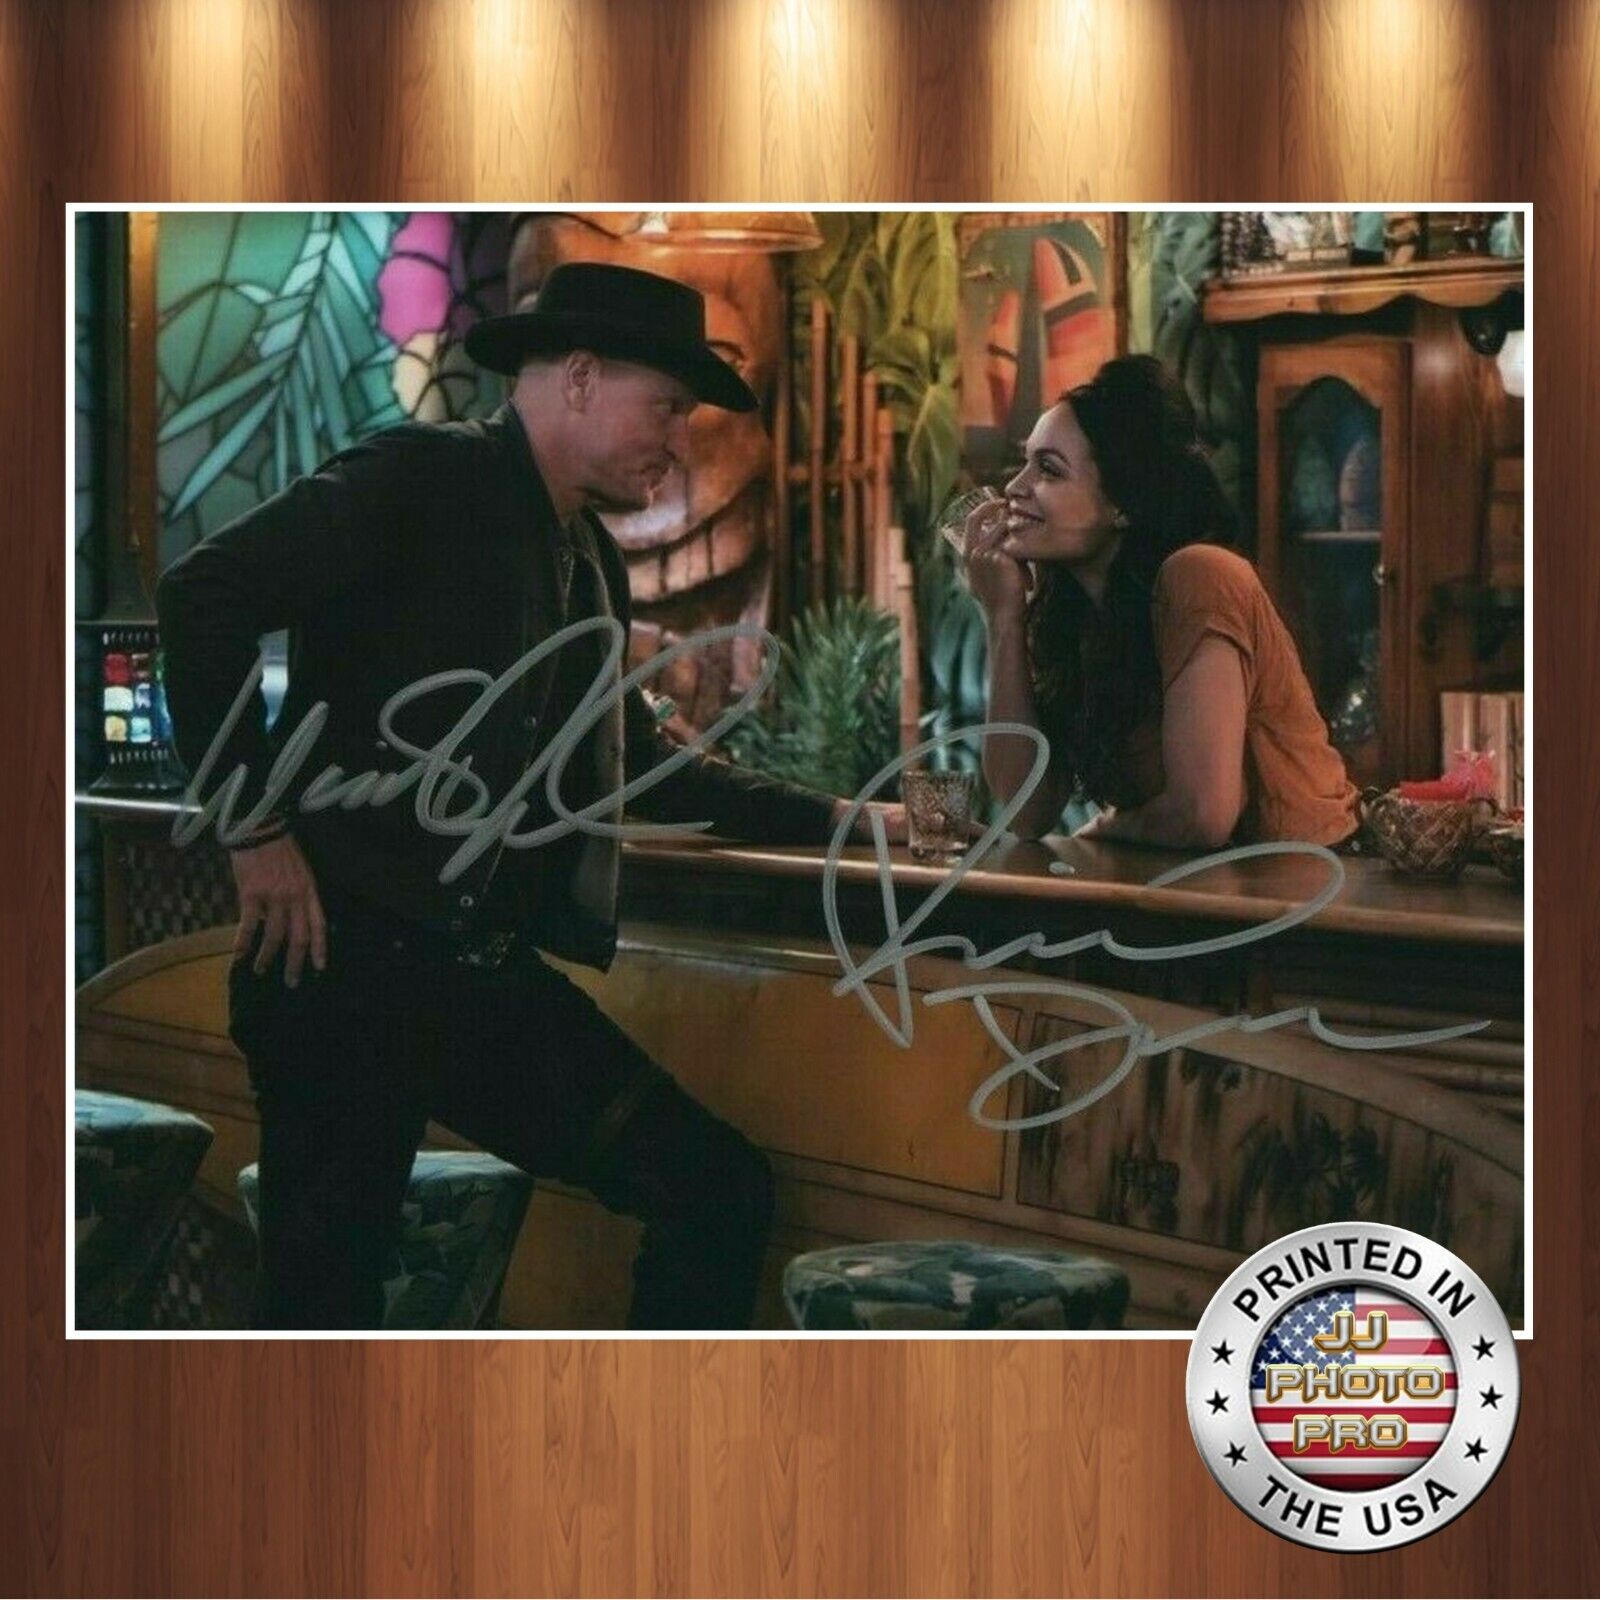 Woody Harrelson Rosario Dawson Autographed Signed 8x10 Photo Poster painting (Zombie) REPRINT